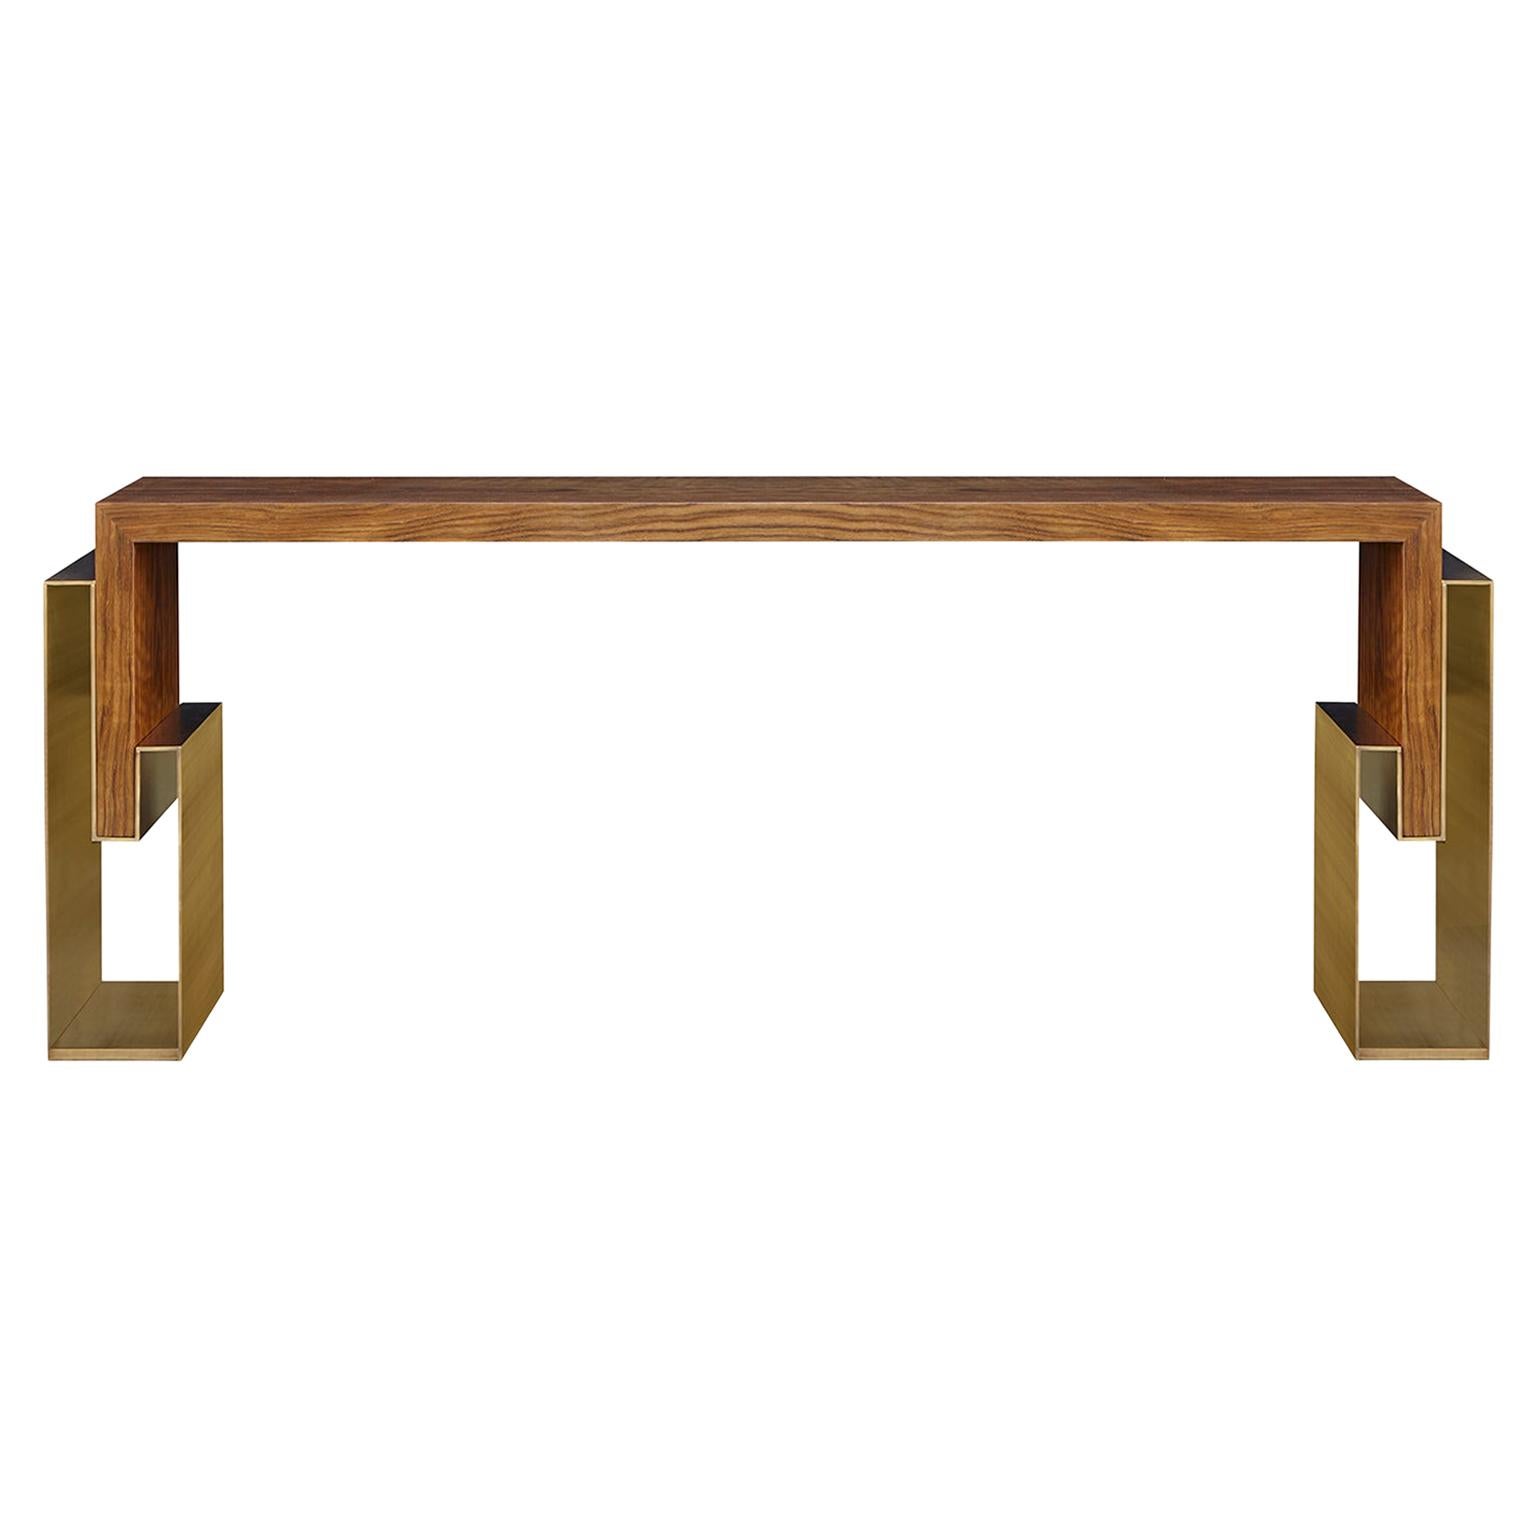 Contemporary Handcrafted Console "Alke" in Wood with Brass Pedestals by Anaktae